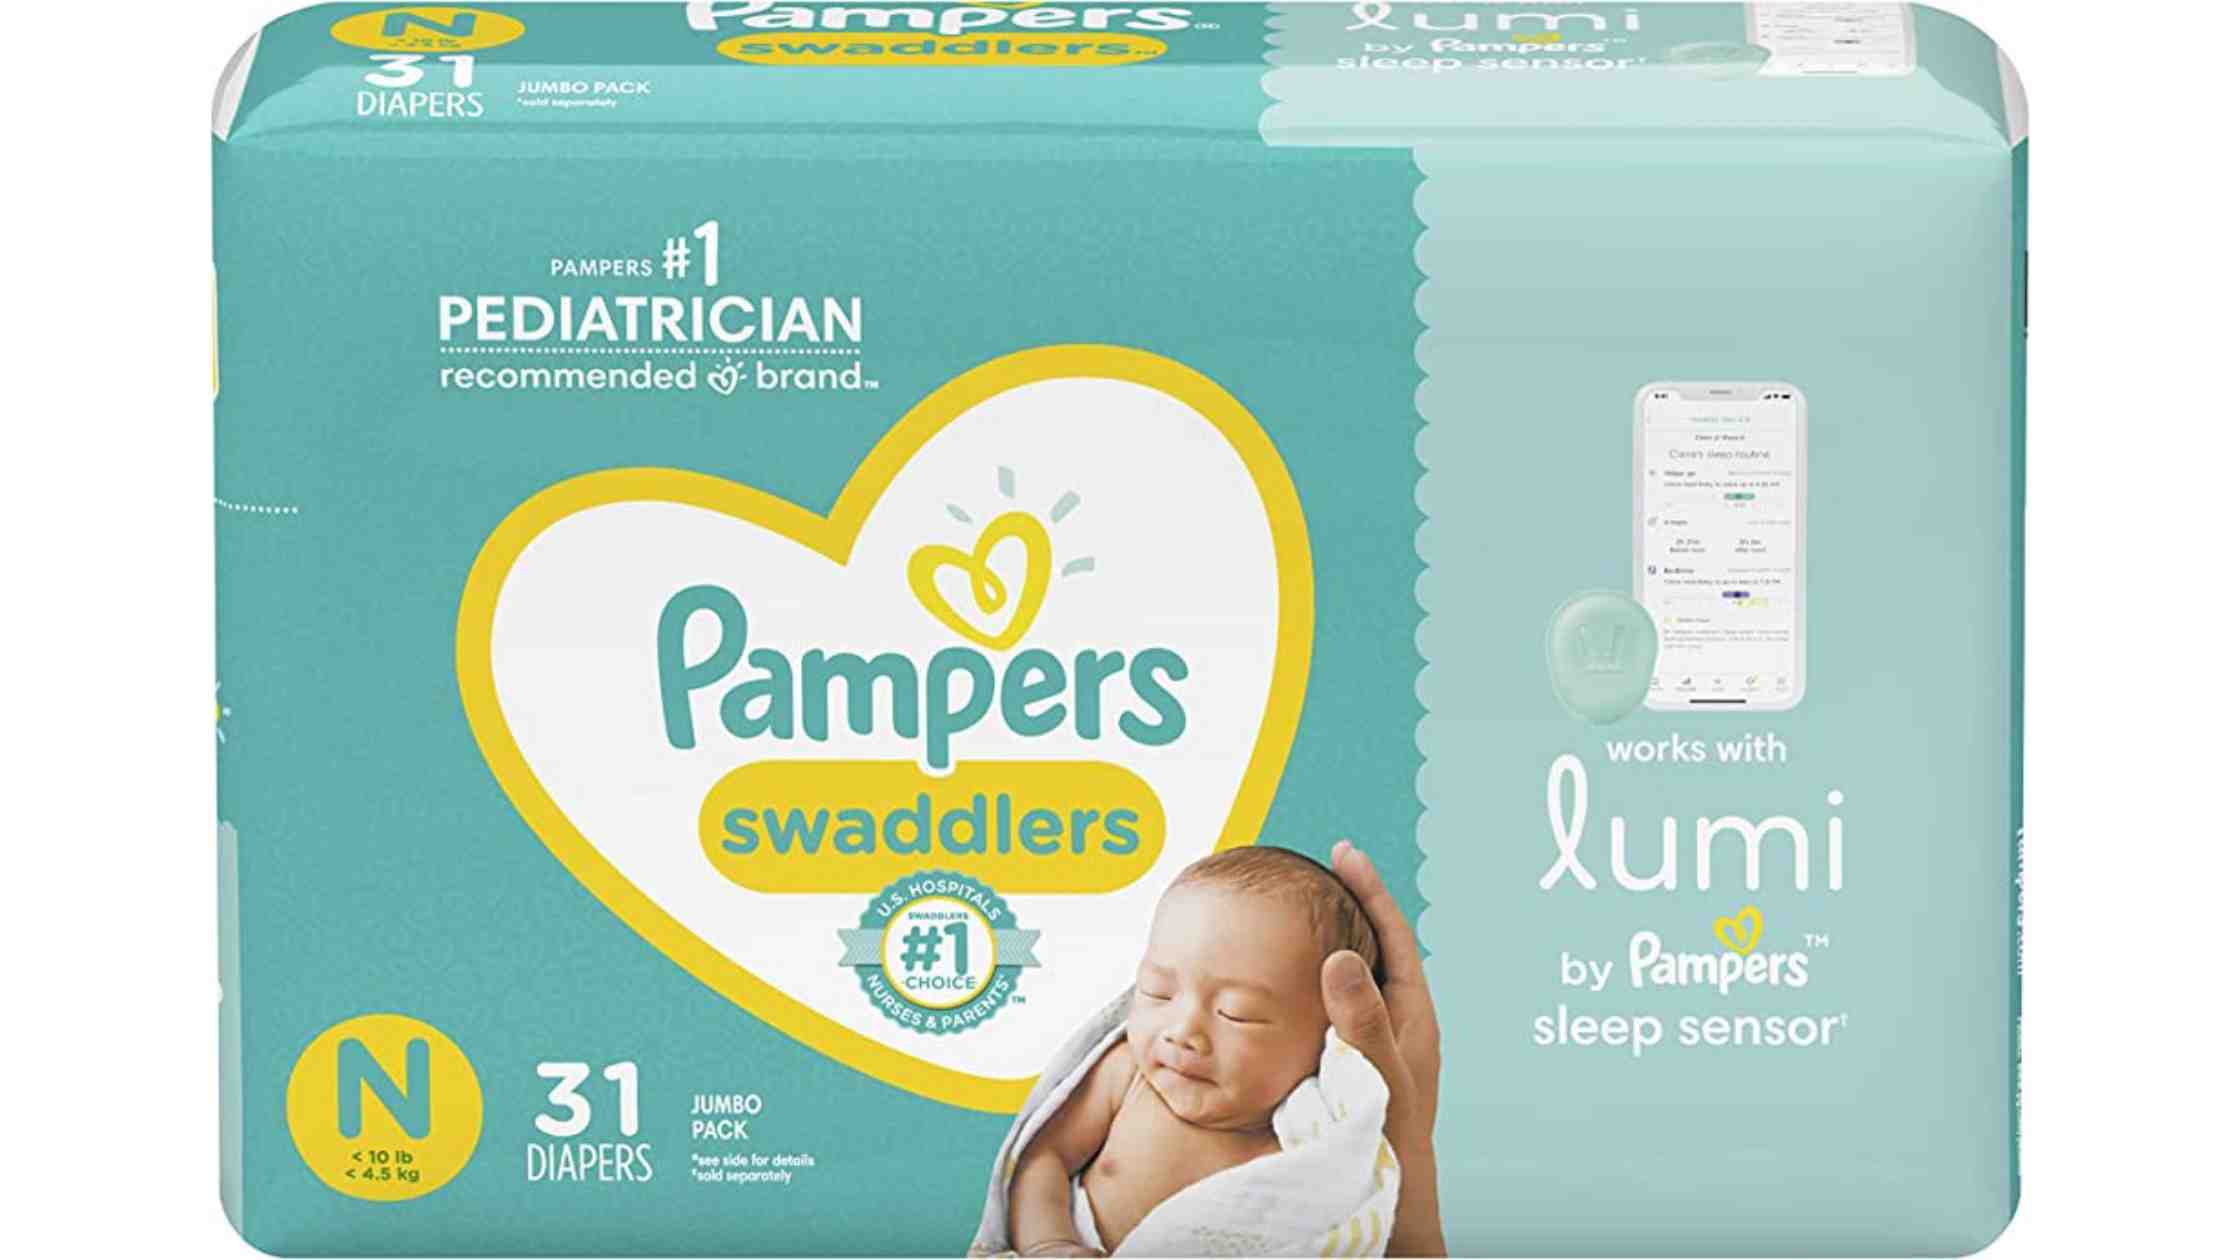 Lumi by Pampers Discontinued